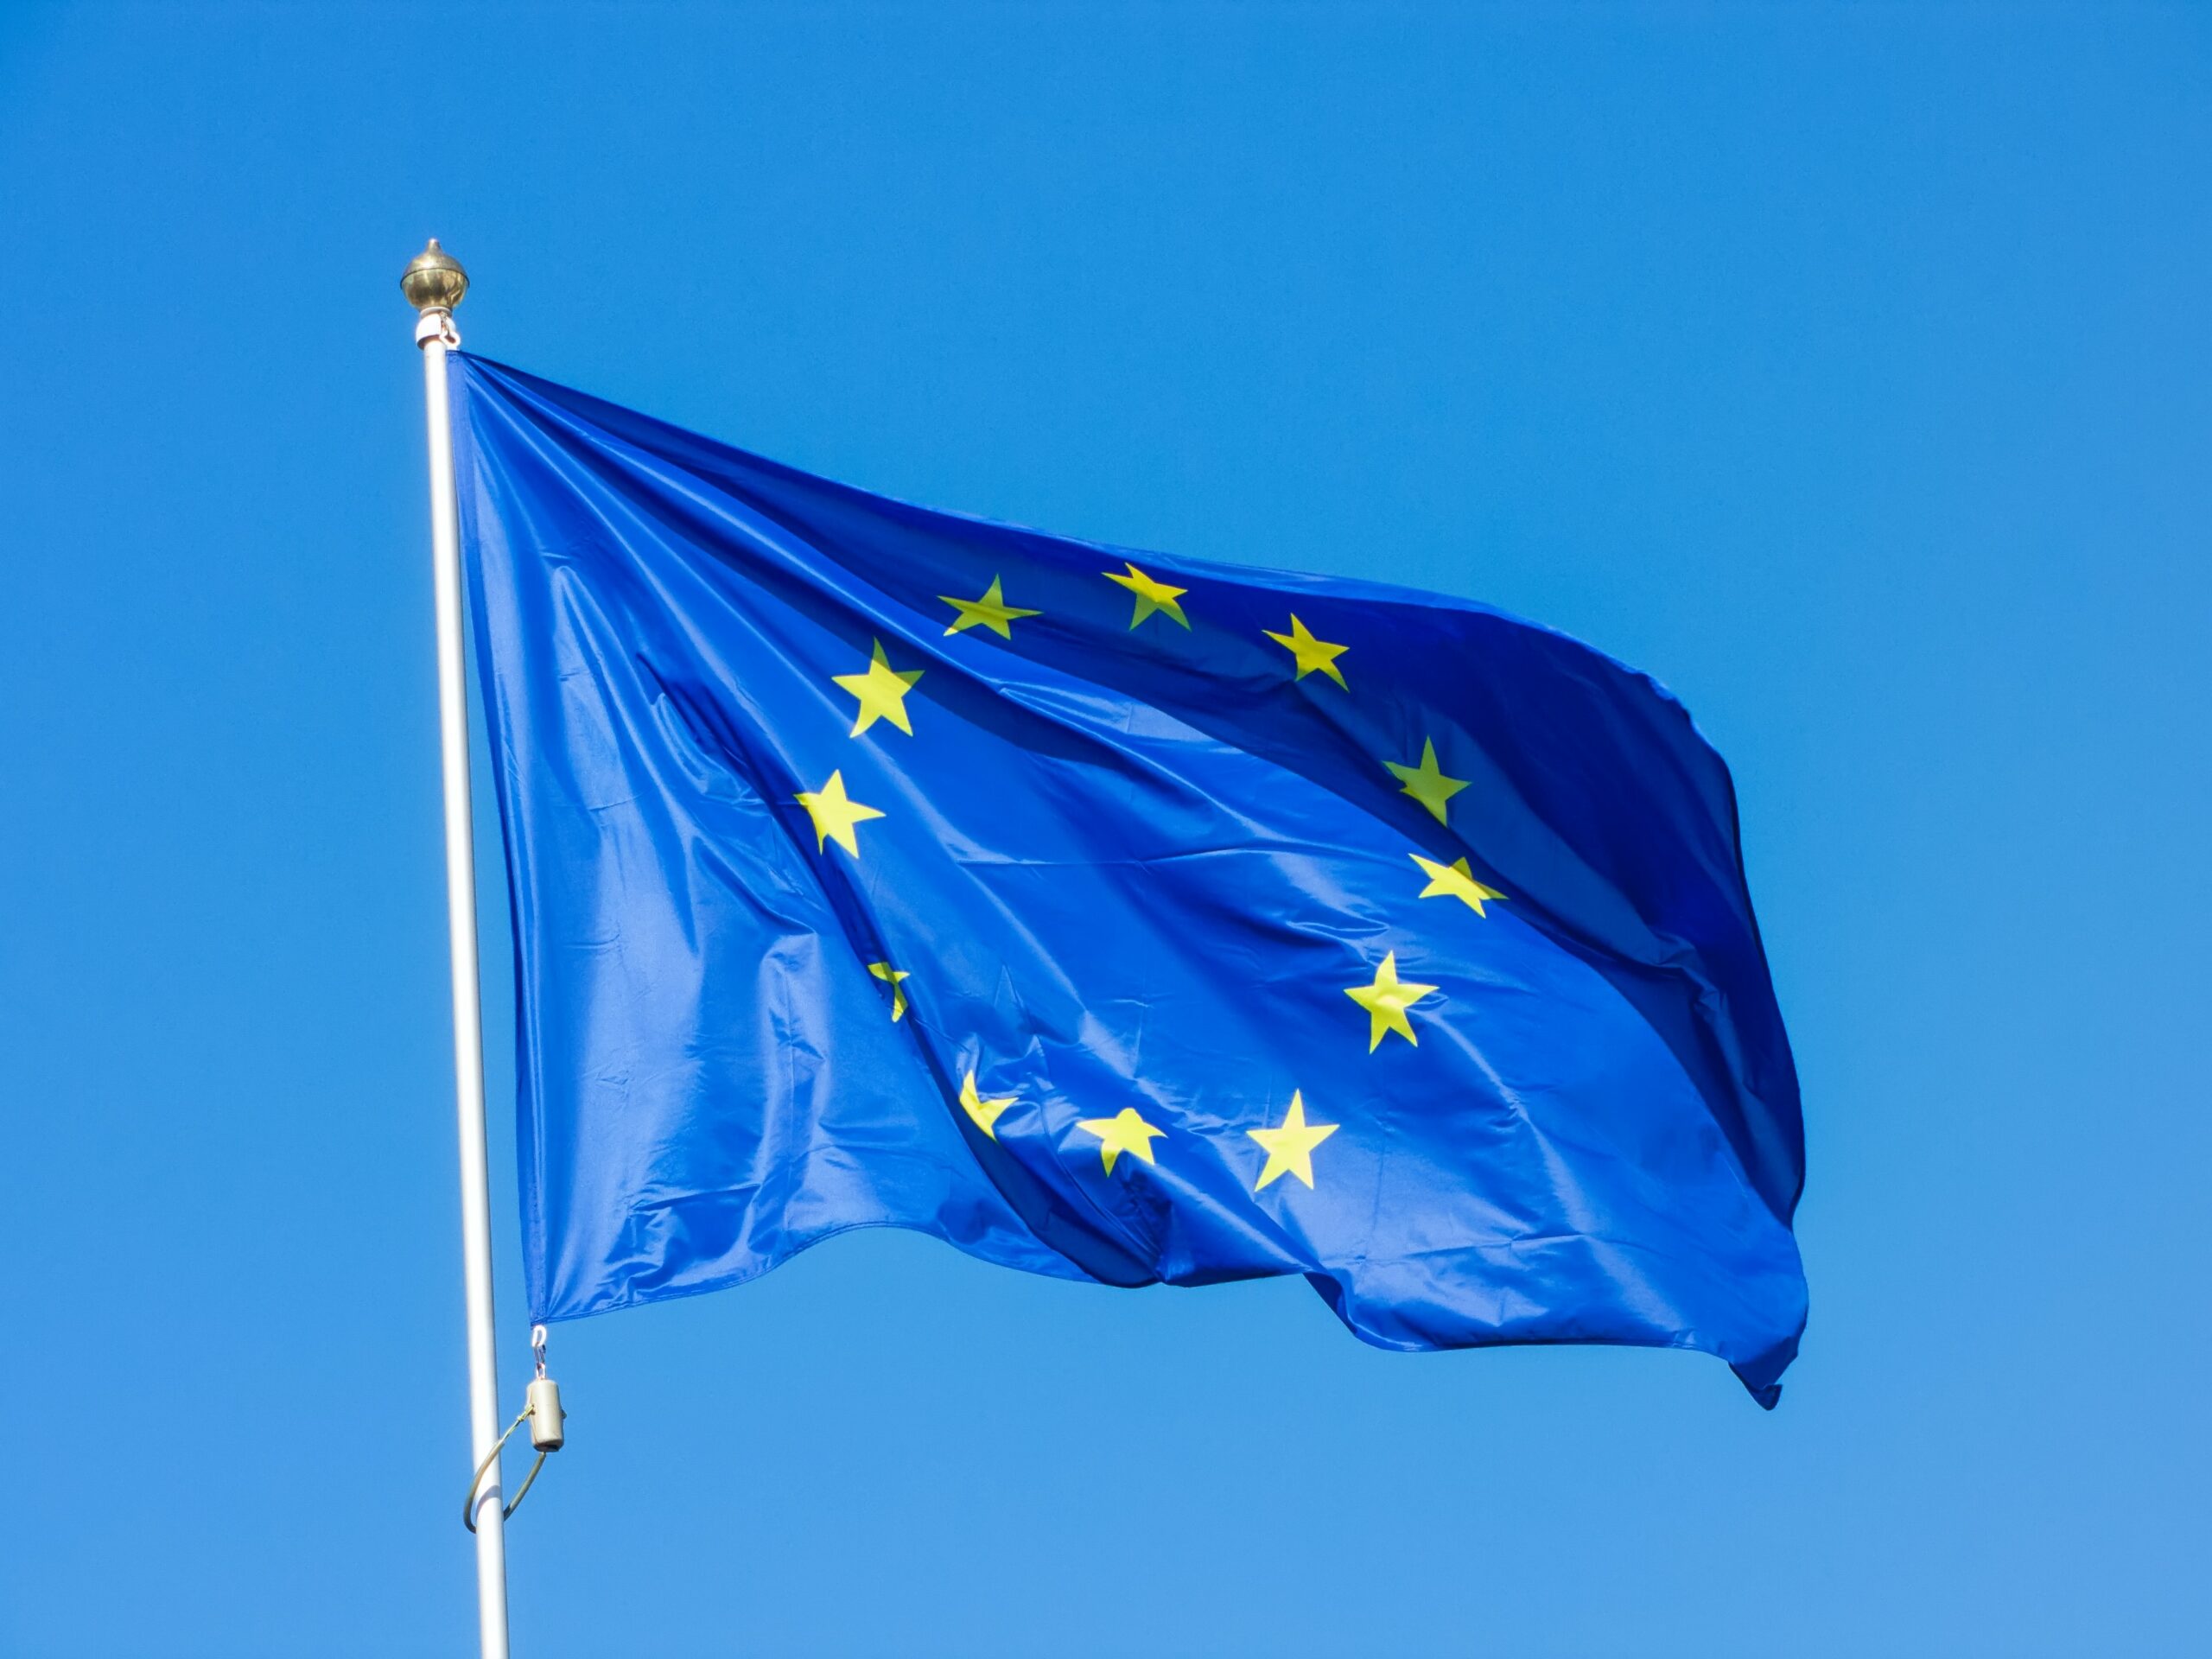 Decorative symbol photo shows a European flag in the wind against blue sky.